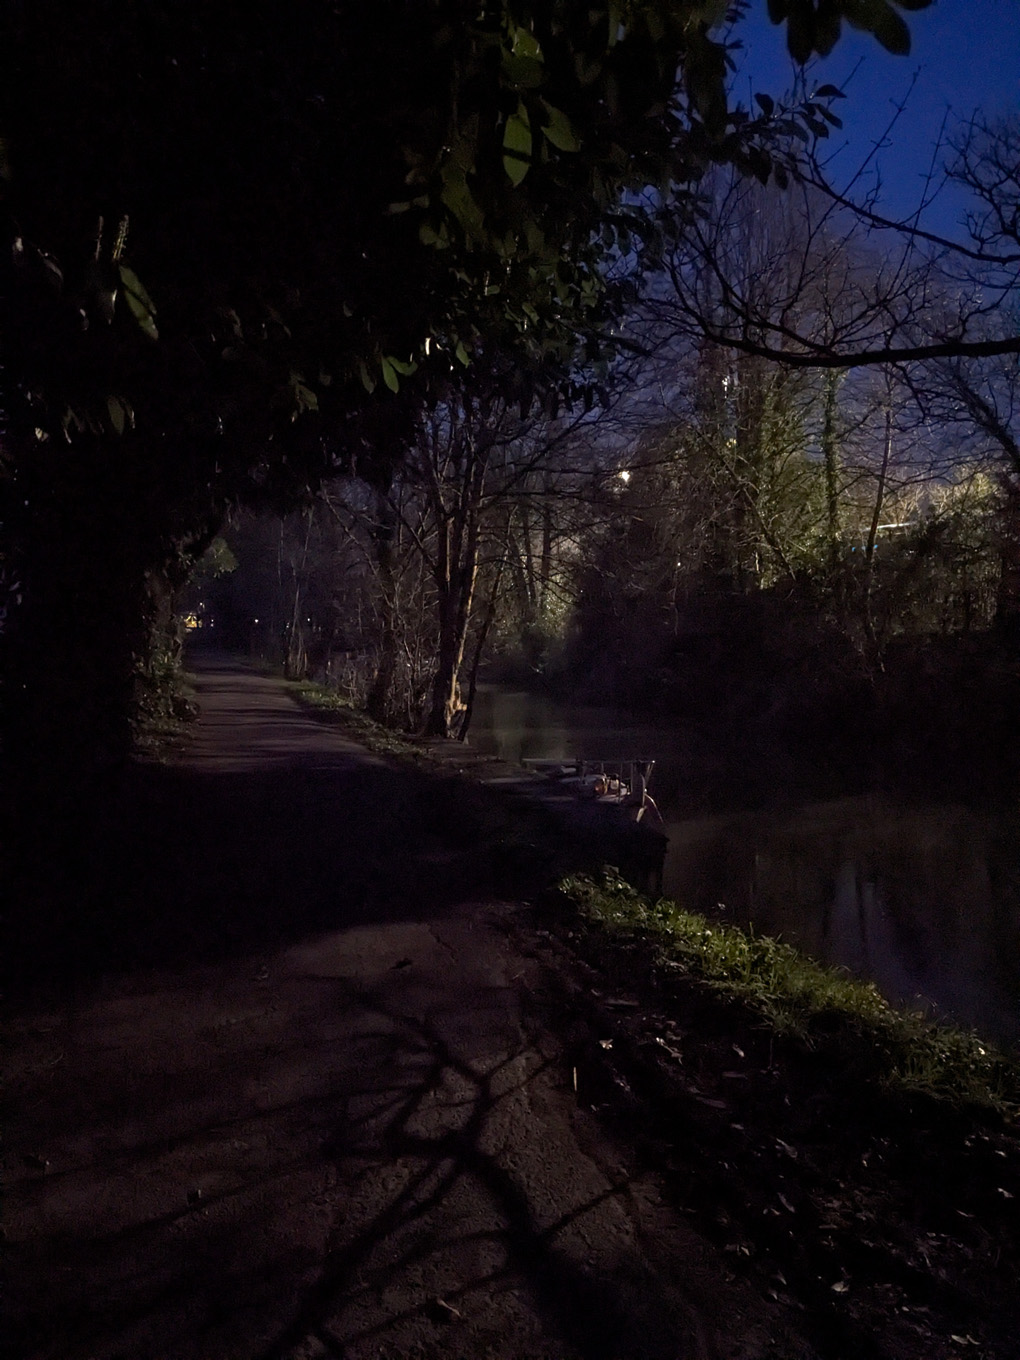 A dark canal path overhung with trees. A boat moored at the side of the path lit from the side and just a hint of blue still visible in the sky.